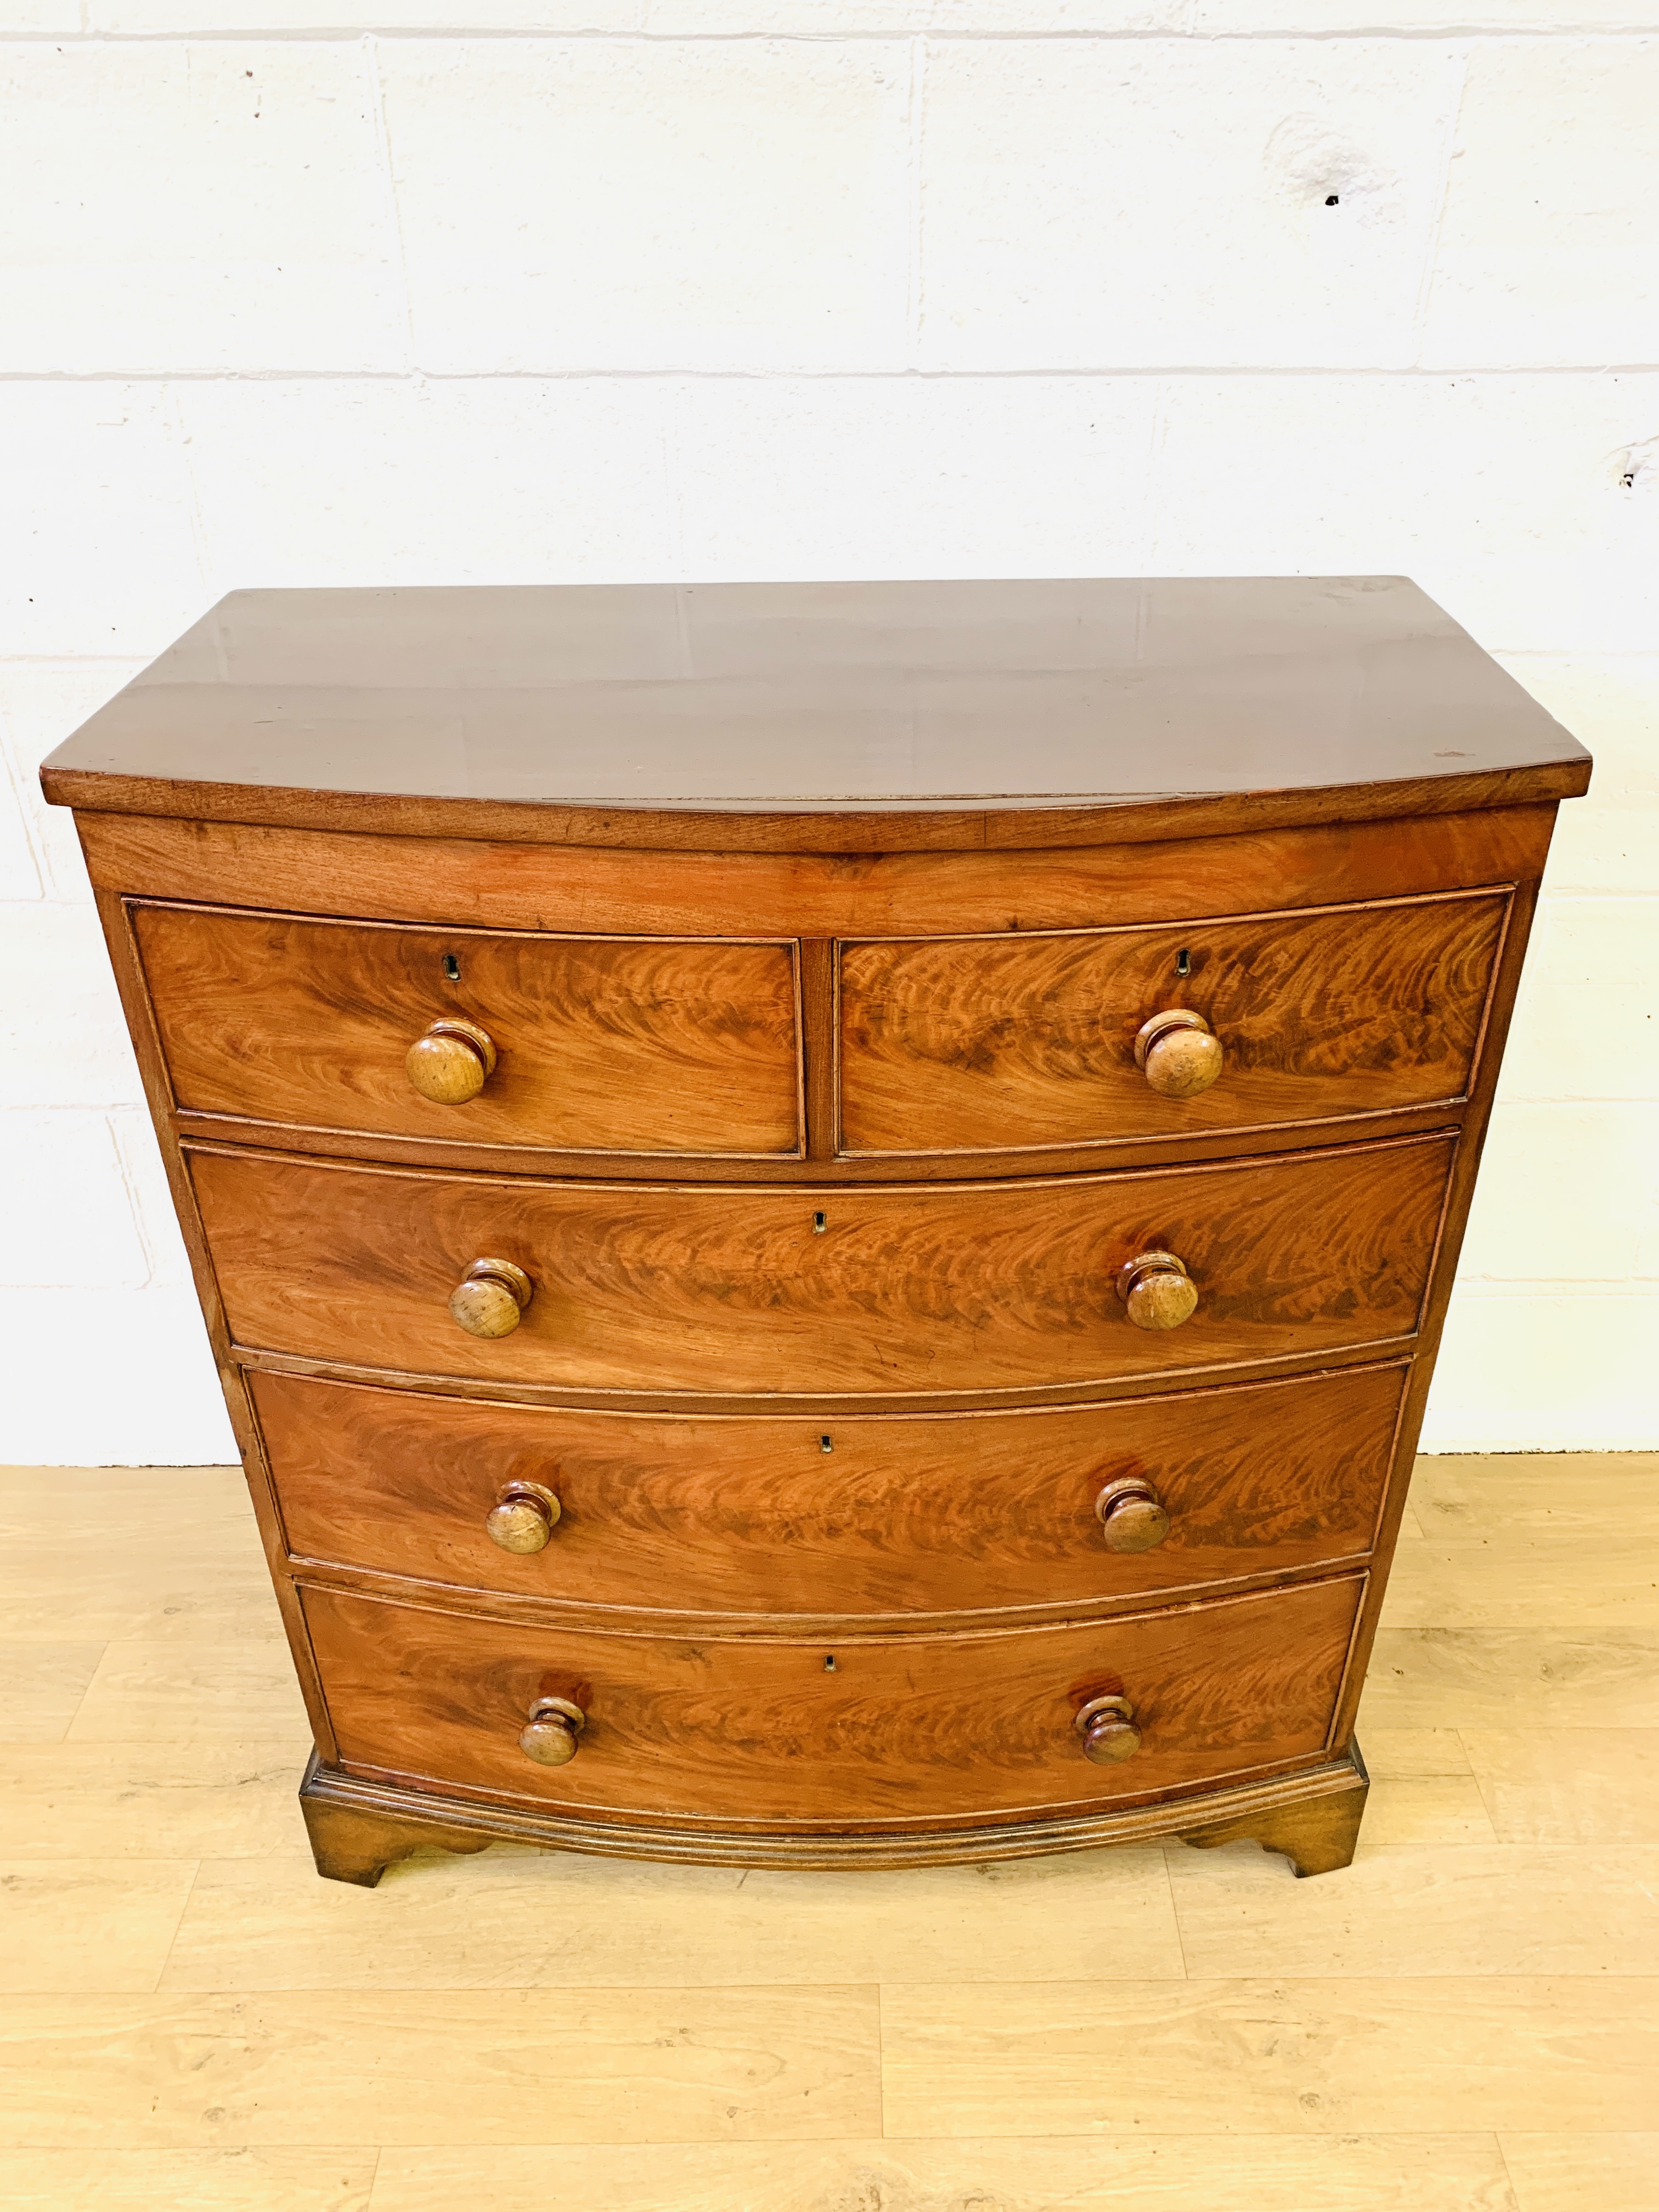 Mahogany chest of drawers - Image 5 of 7